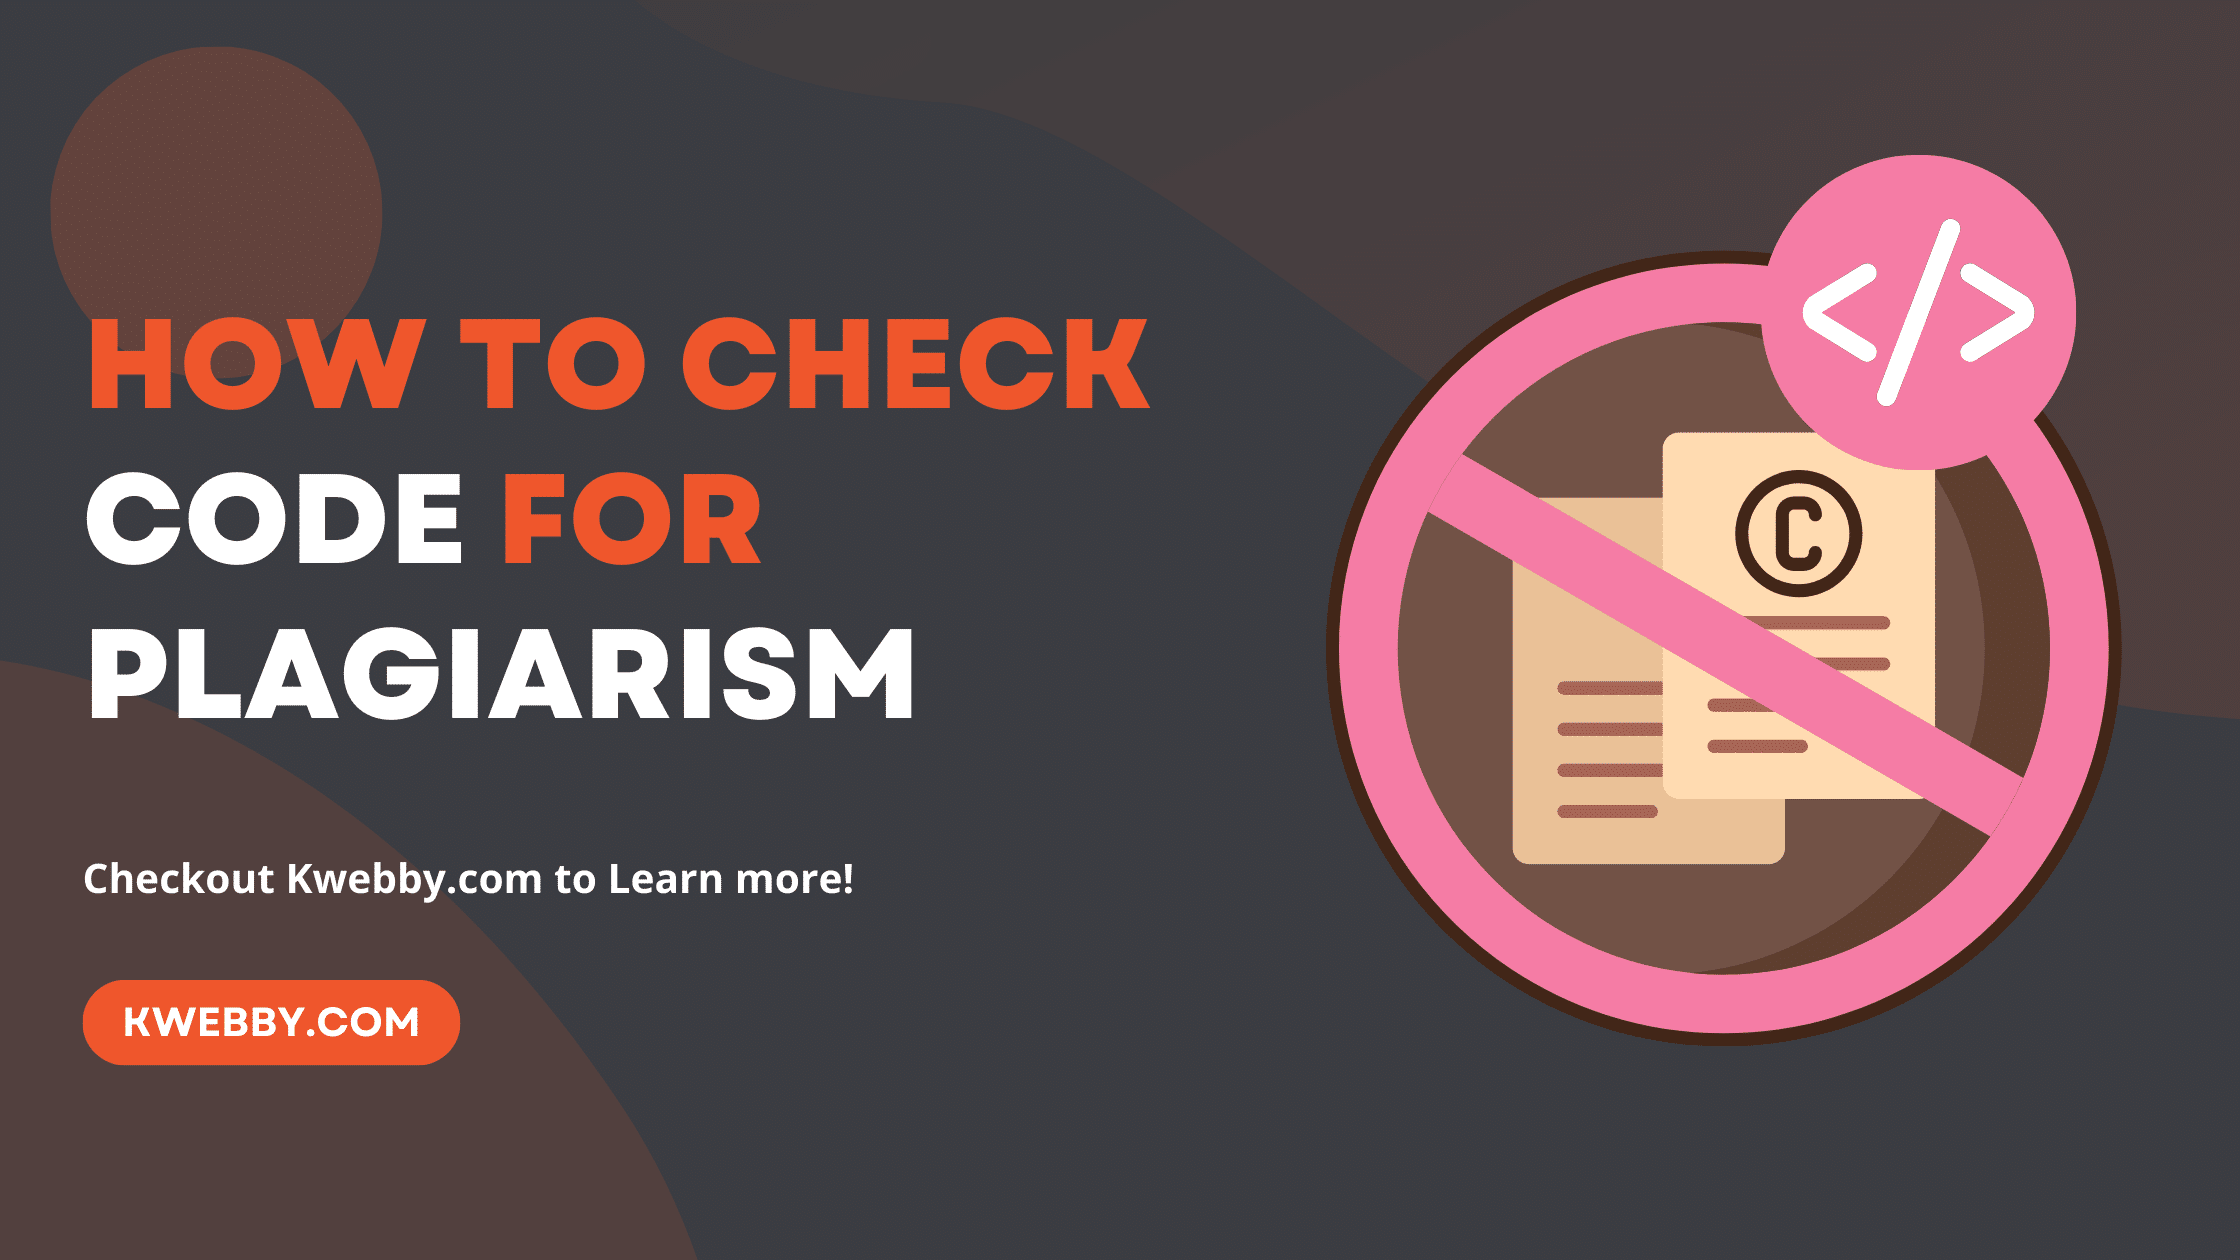 How to Check Code for Plagiarism